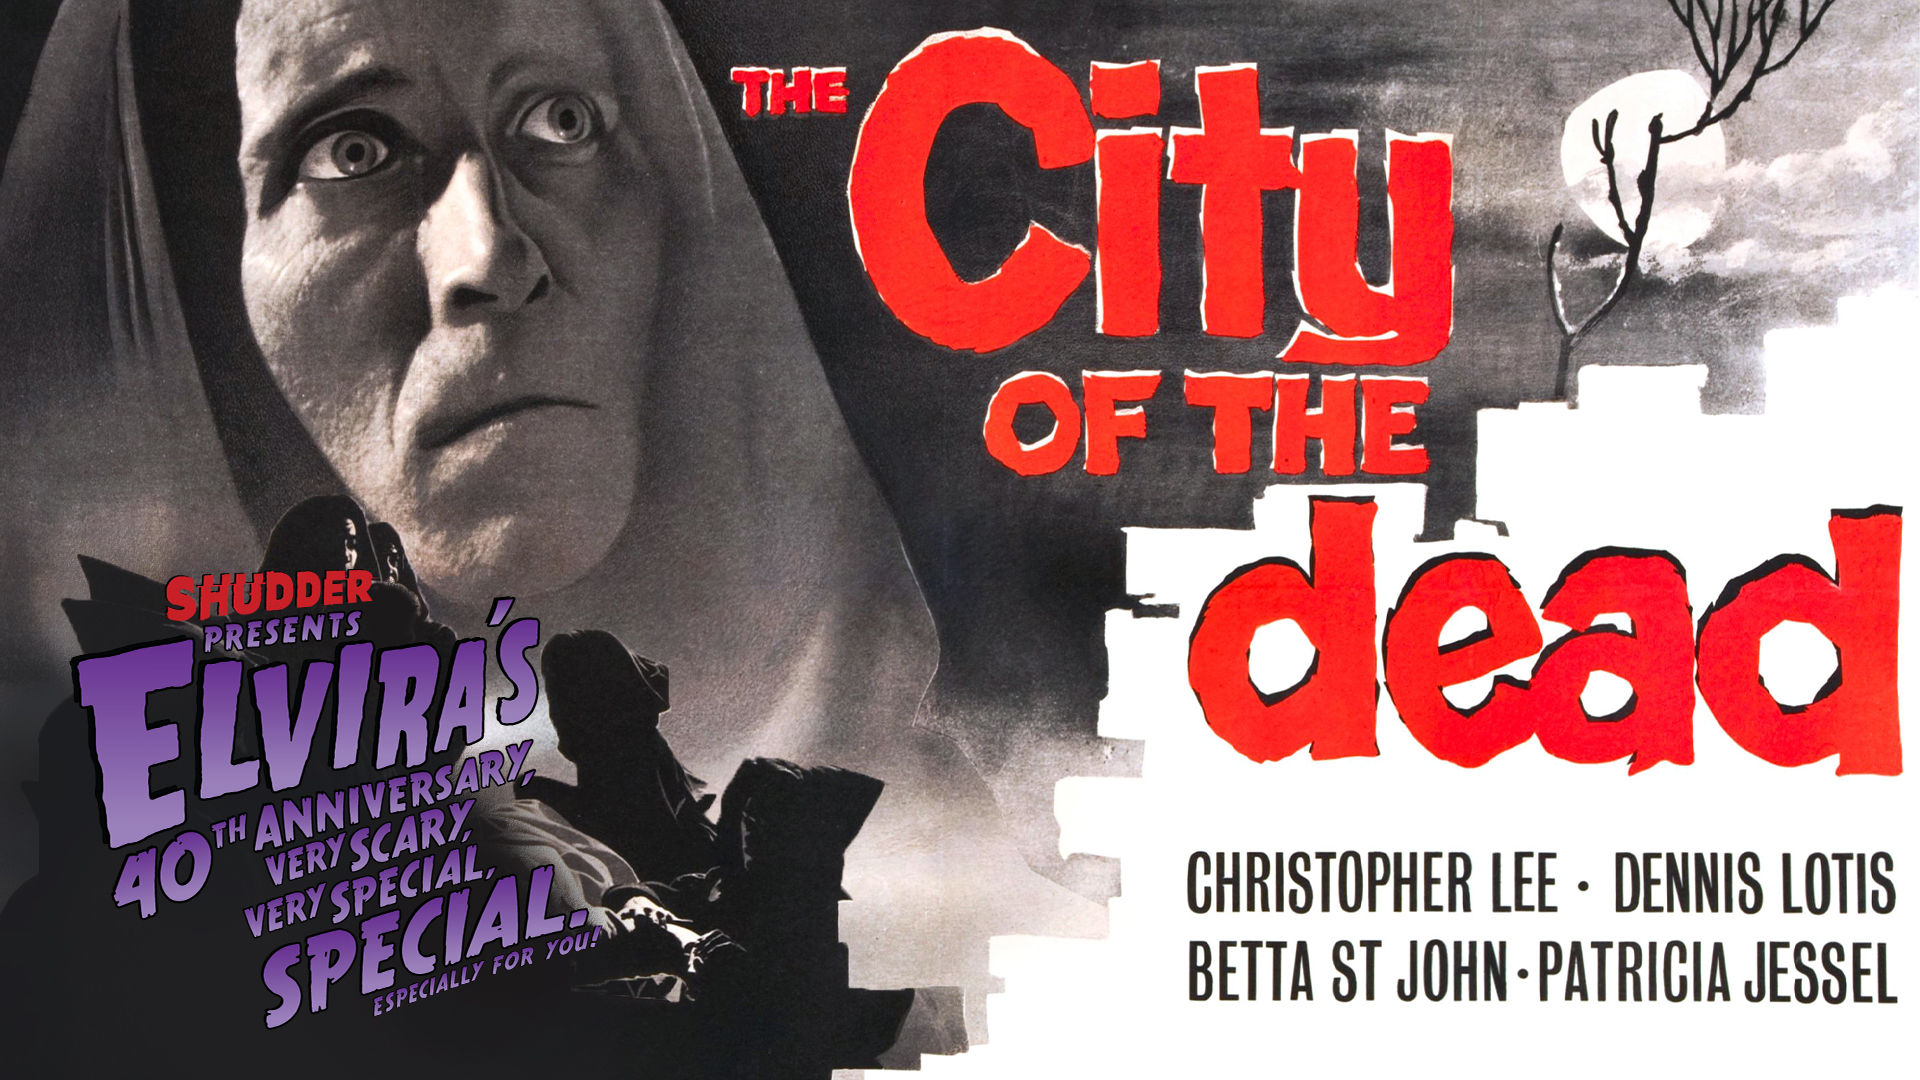 City of the Dead, In this atmospheric classic, a professor sends a student to the site of 17th century witch burnings. Once there, she learns of the satanic secrets that live on., TV-MA, Season 1033843, Episode 3